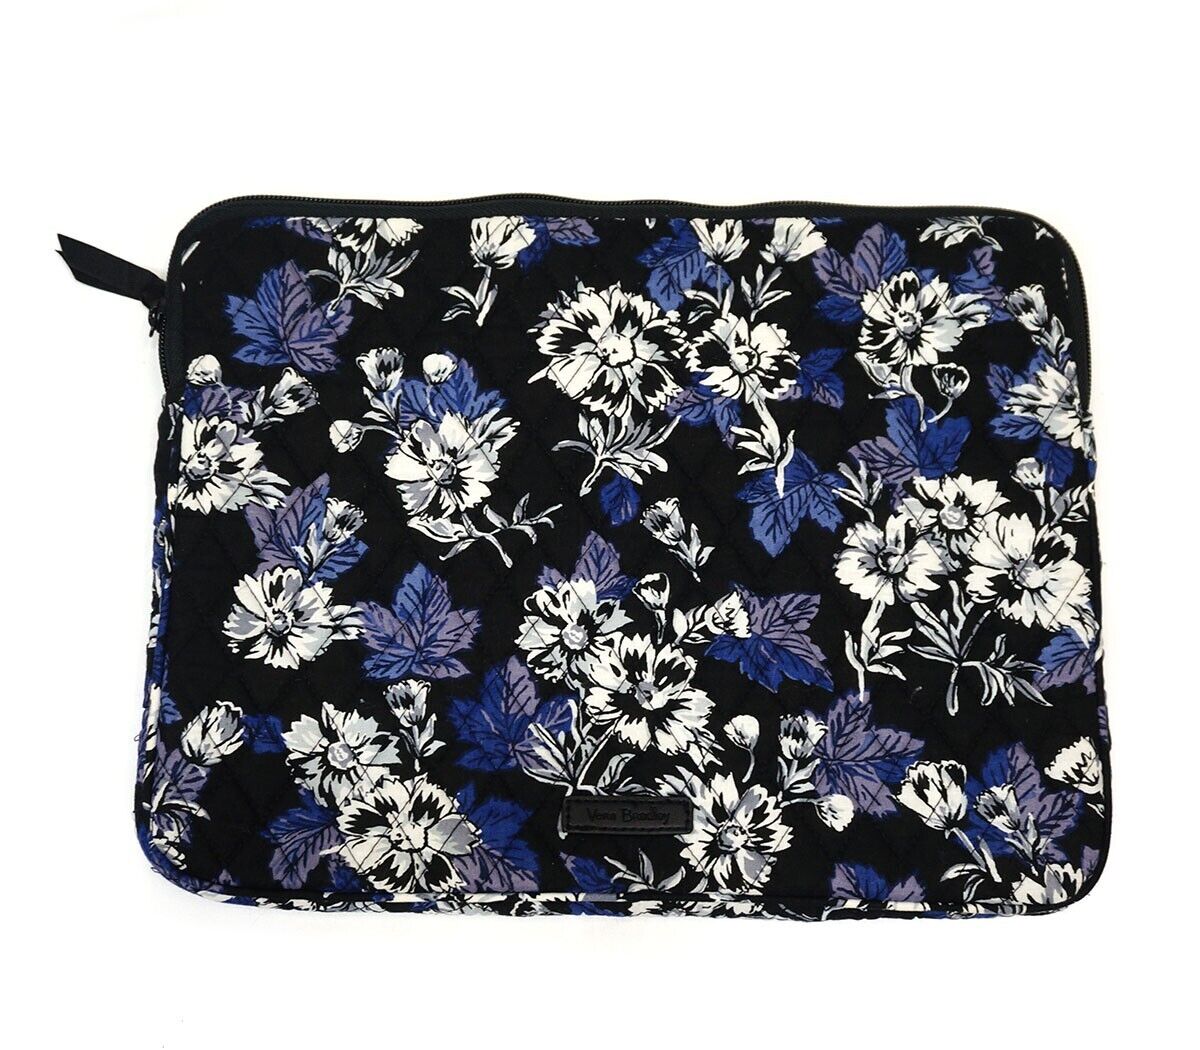 ❤️ VERA BRADLEY Frosted Floral Laptop Sleeve 14